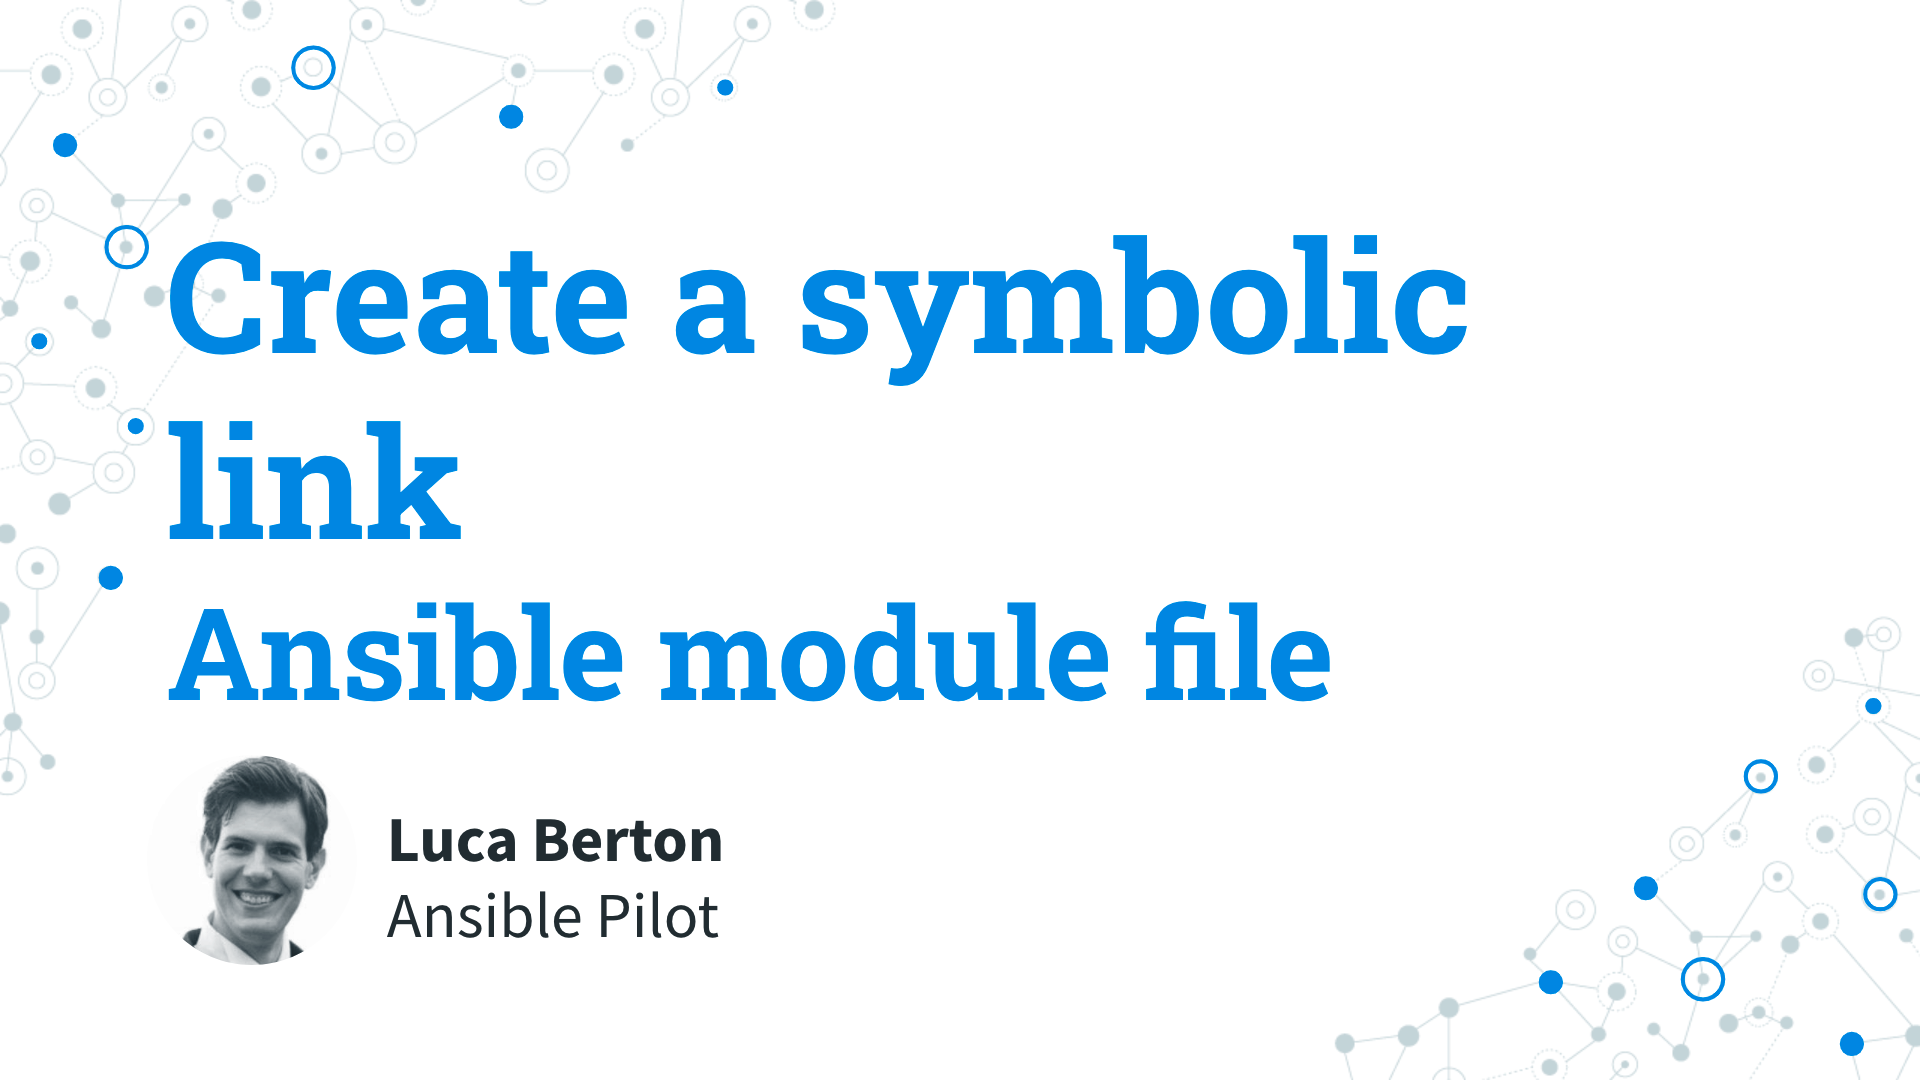 Create a symbolic link (also symlink or soft link) in Linux - Ansible module file